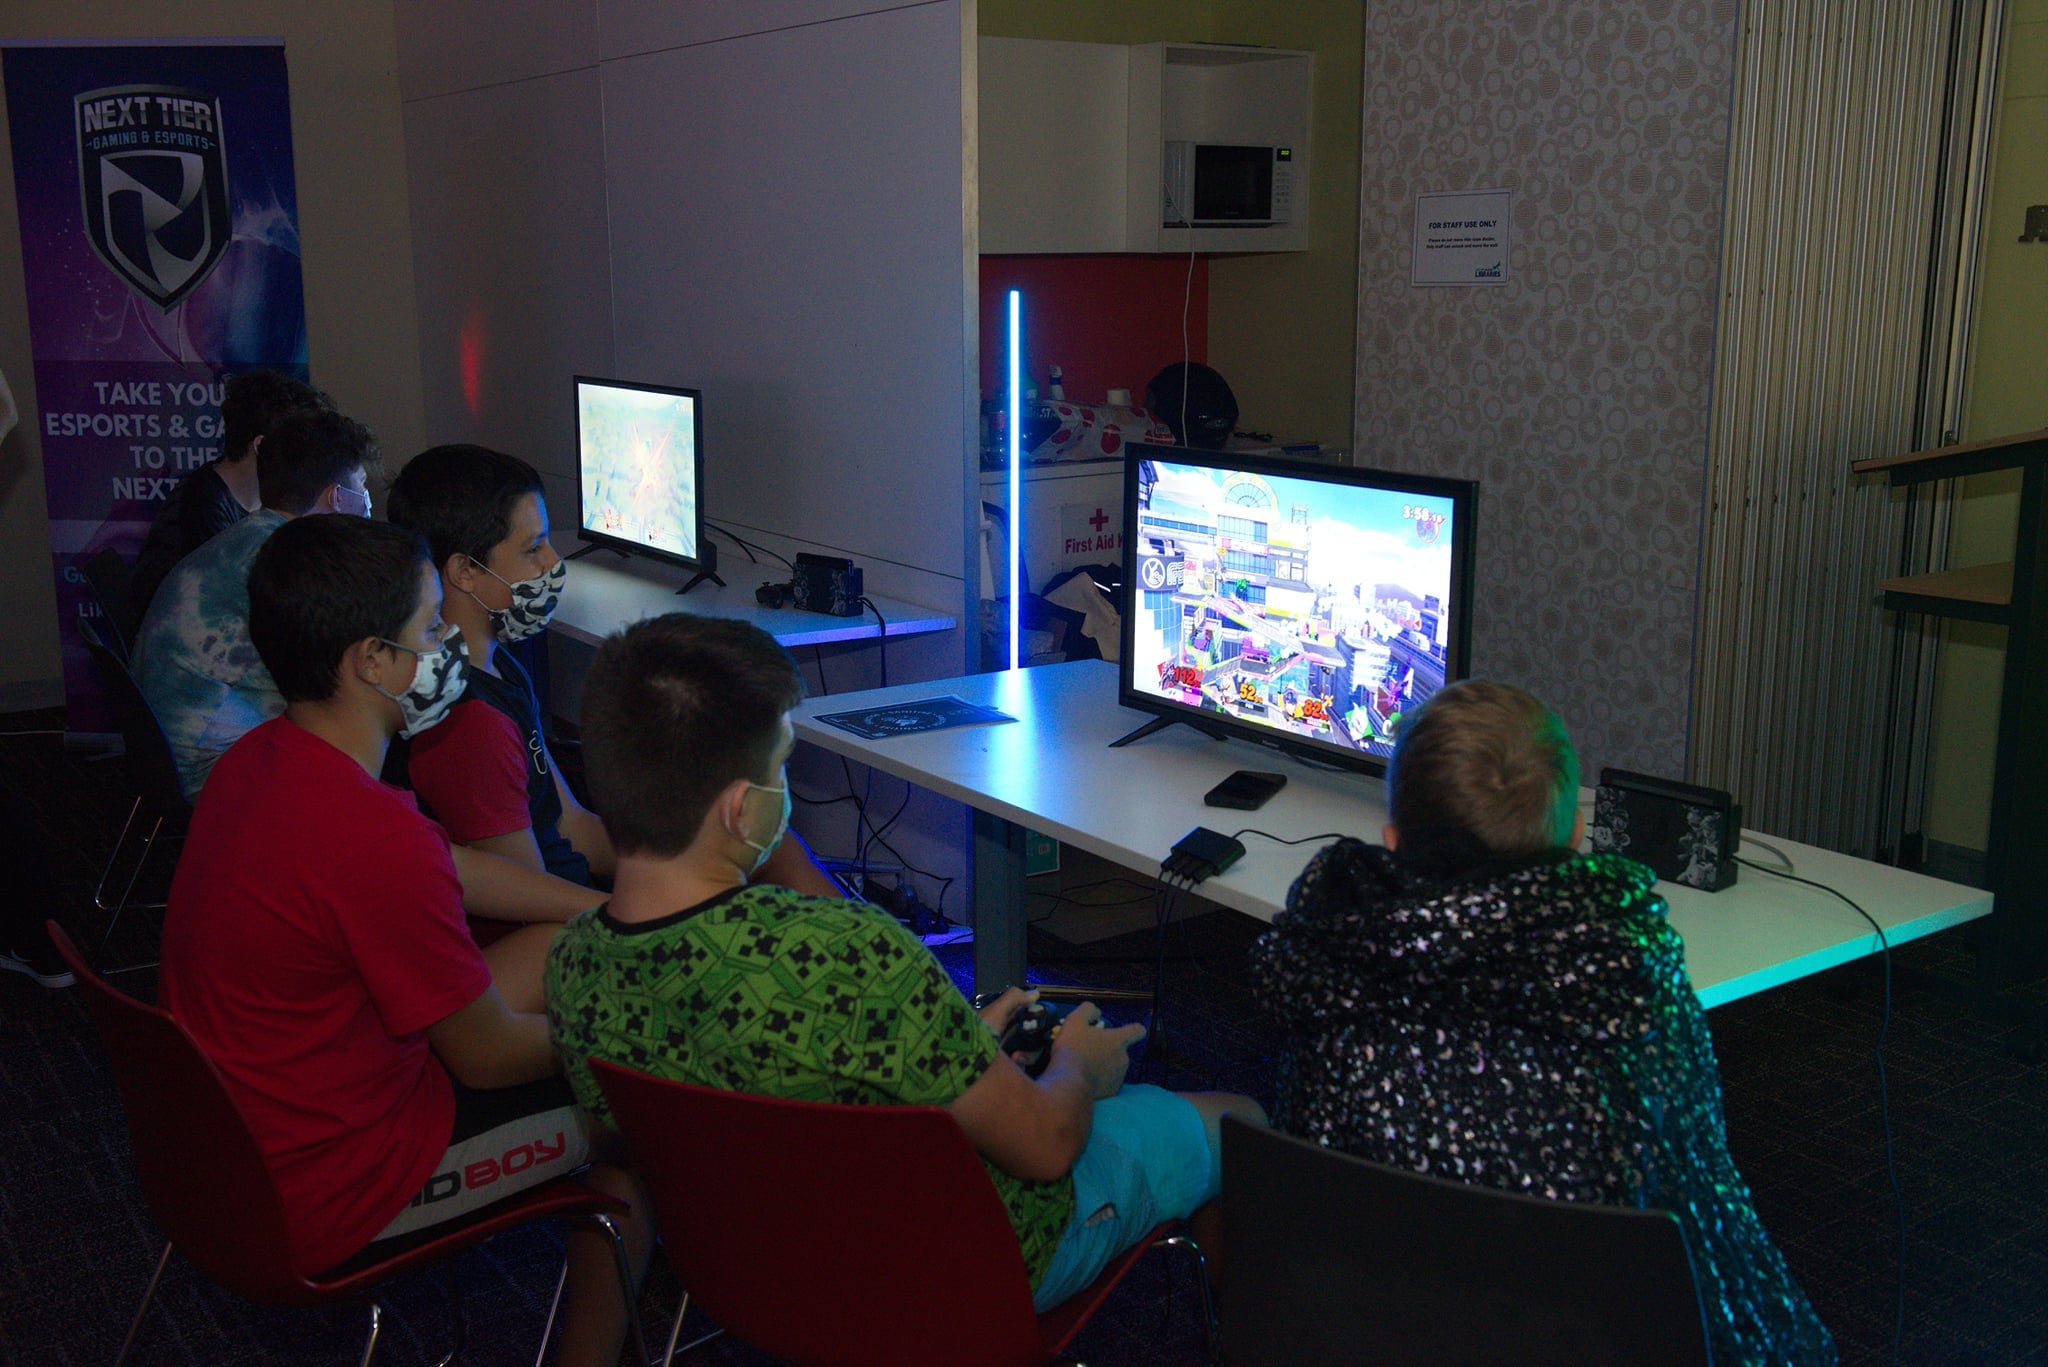 young people playing video games